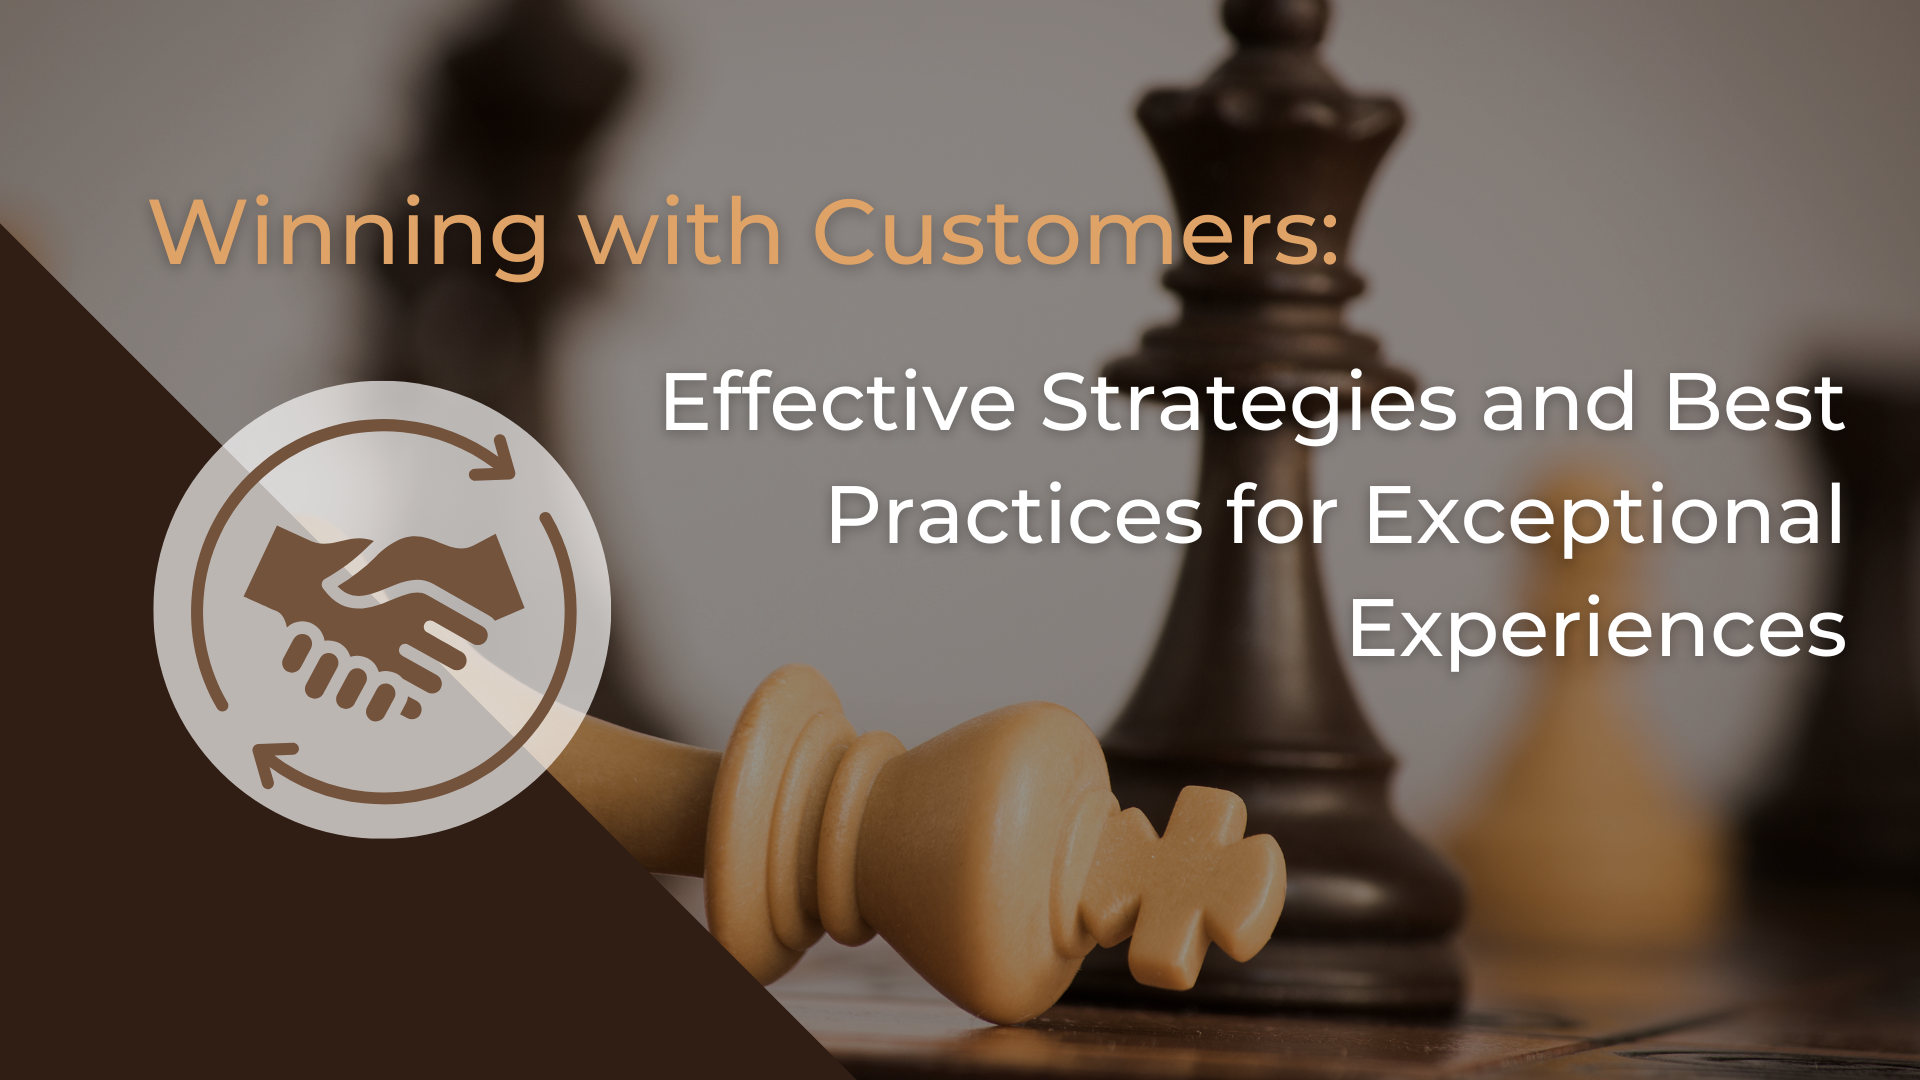 Effective strategies for Generating Exceptional Customer Experiences